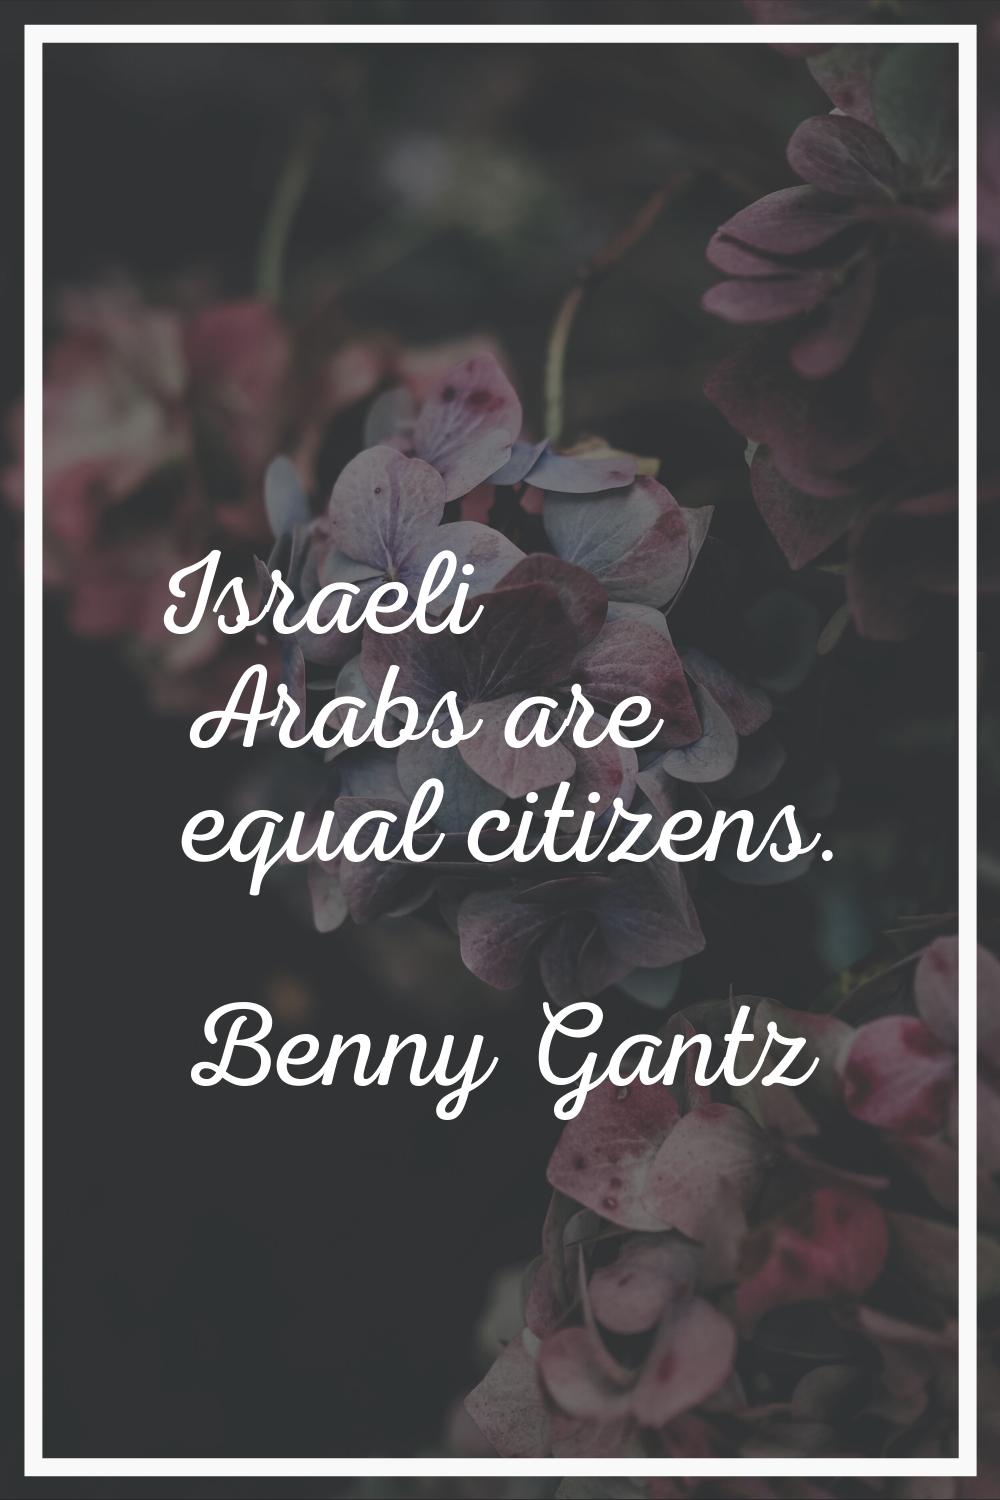 Israeli Arabs are equal citizens.